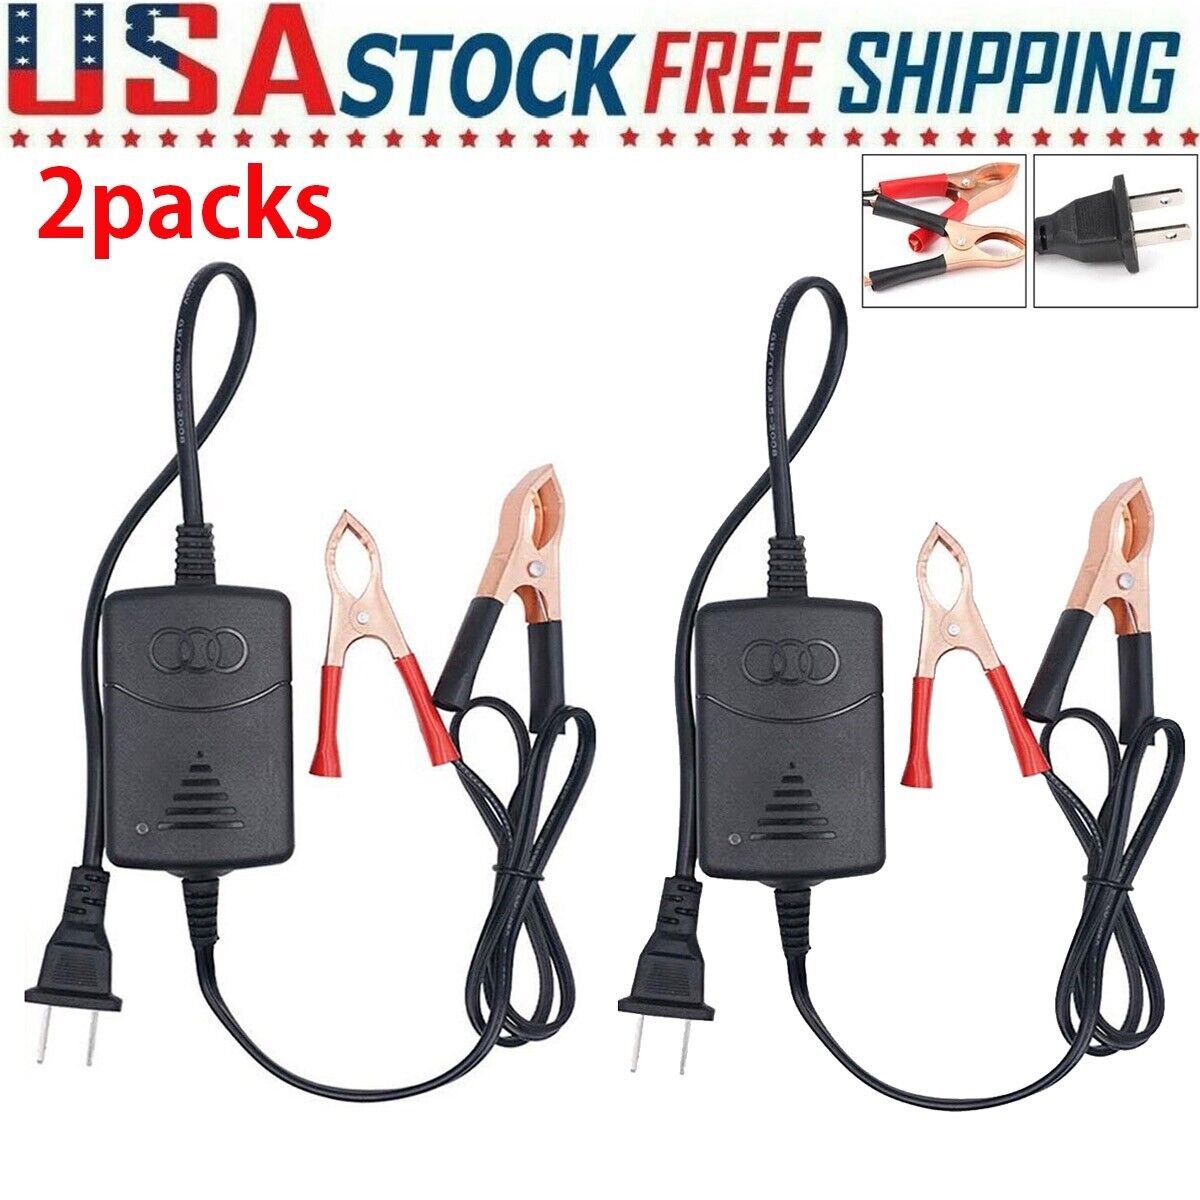 2PCS Car Battery Charger Maintainer 12V Trickle RV for Truck Motorcycle ATV Auto